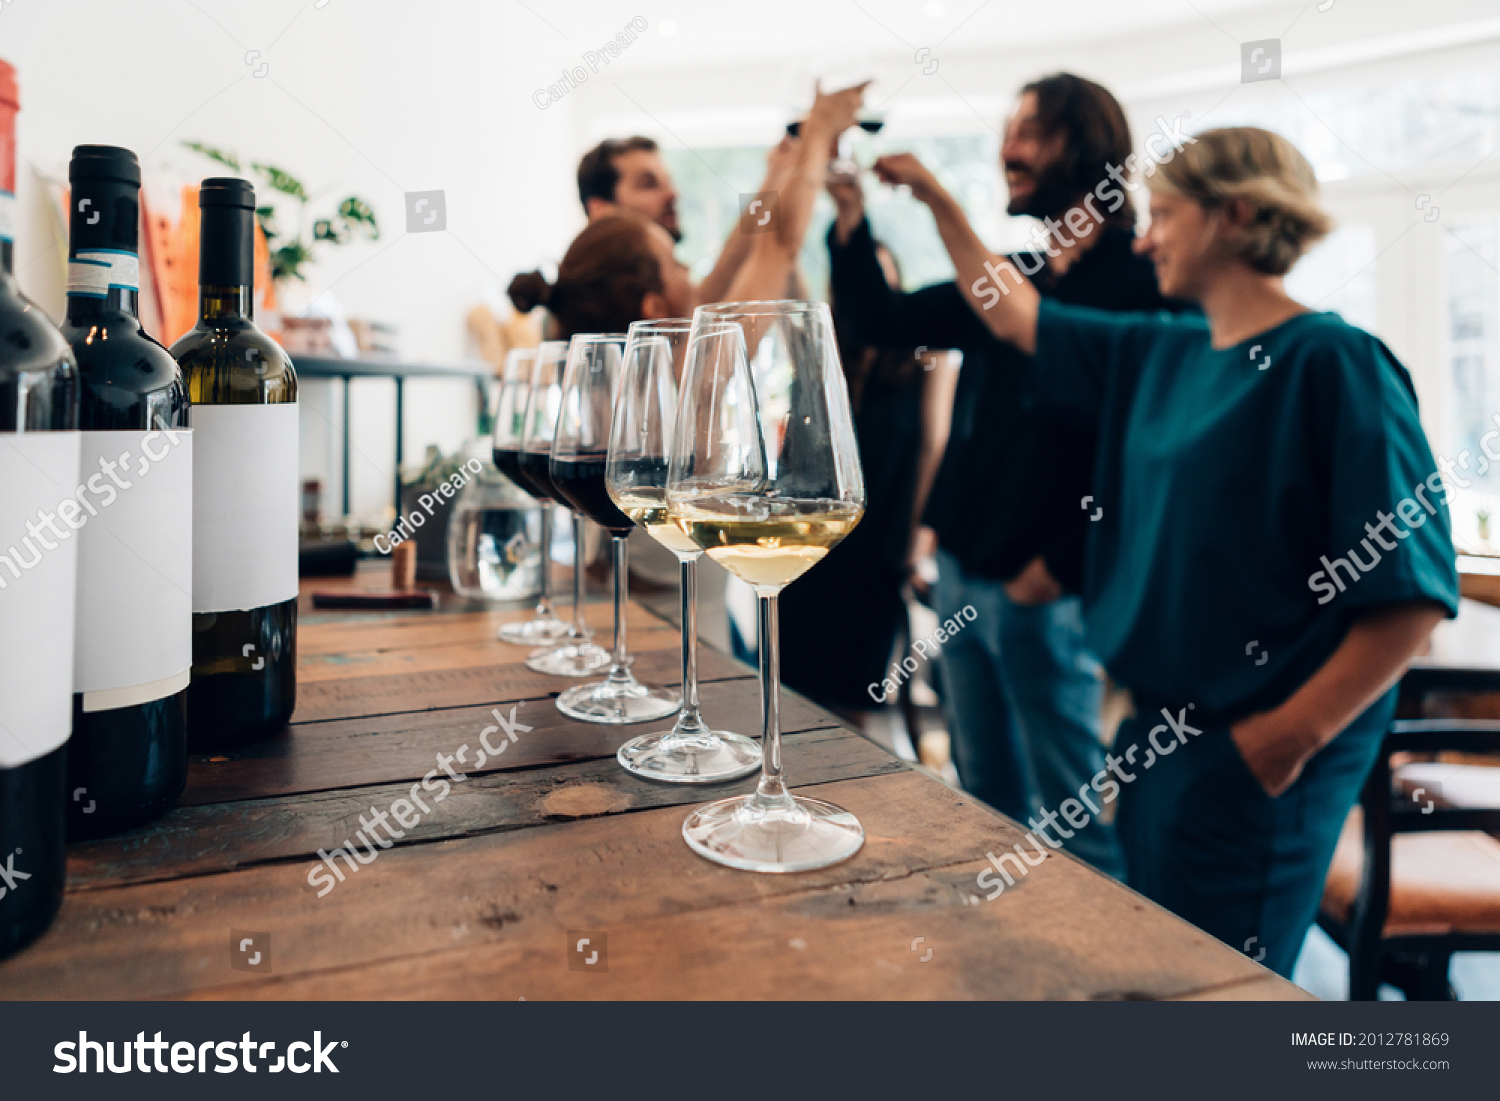 people inside a bar chilling out with a drink - friends talking and drinking in a winery - Millennials toasting at a wine tasting #2012781869